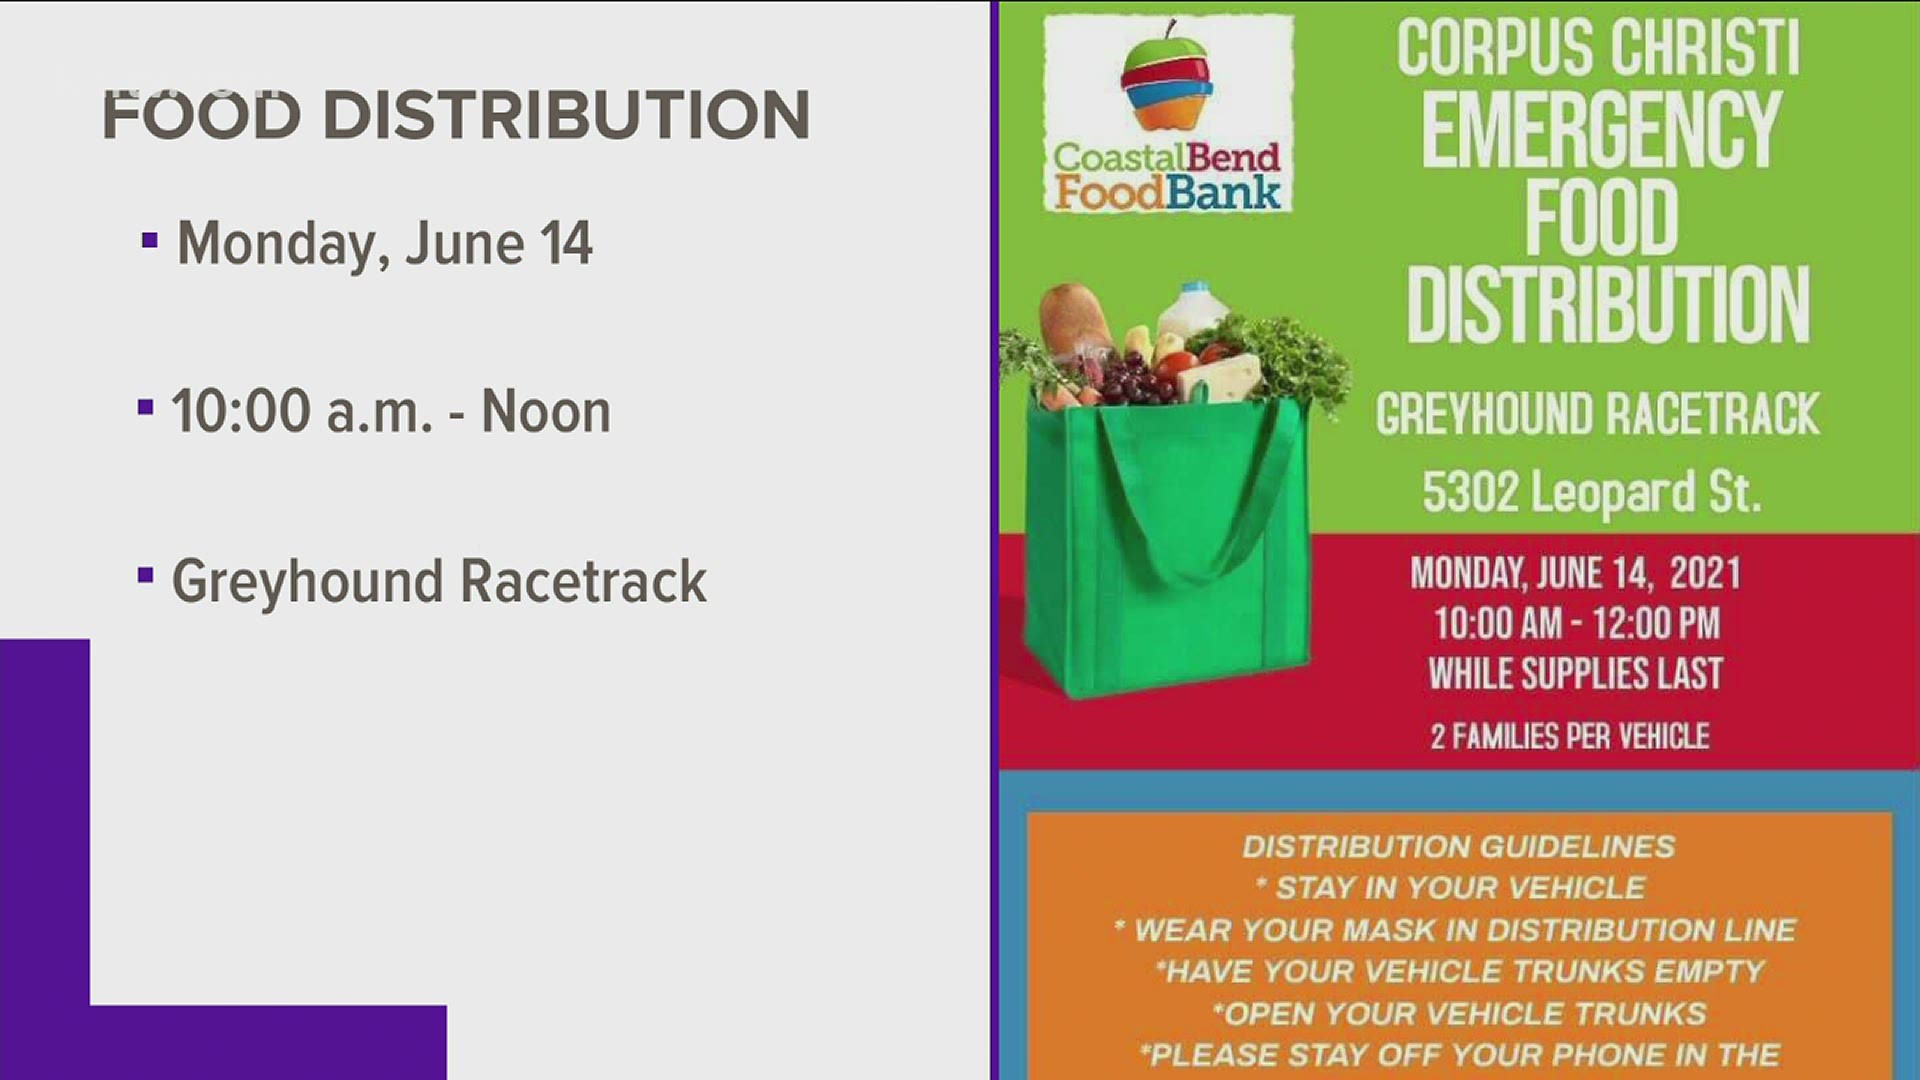 The emergency food distribution will take place at the Greyhound Race Track.